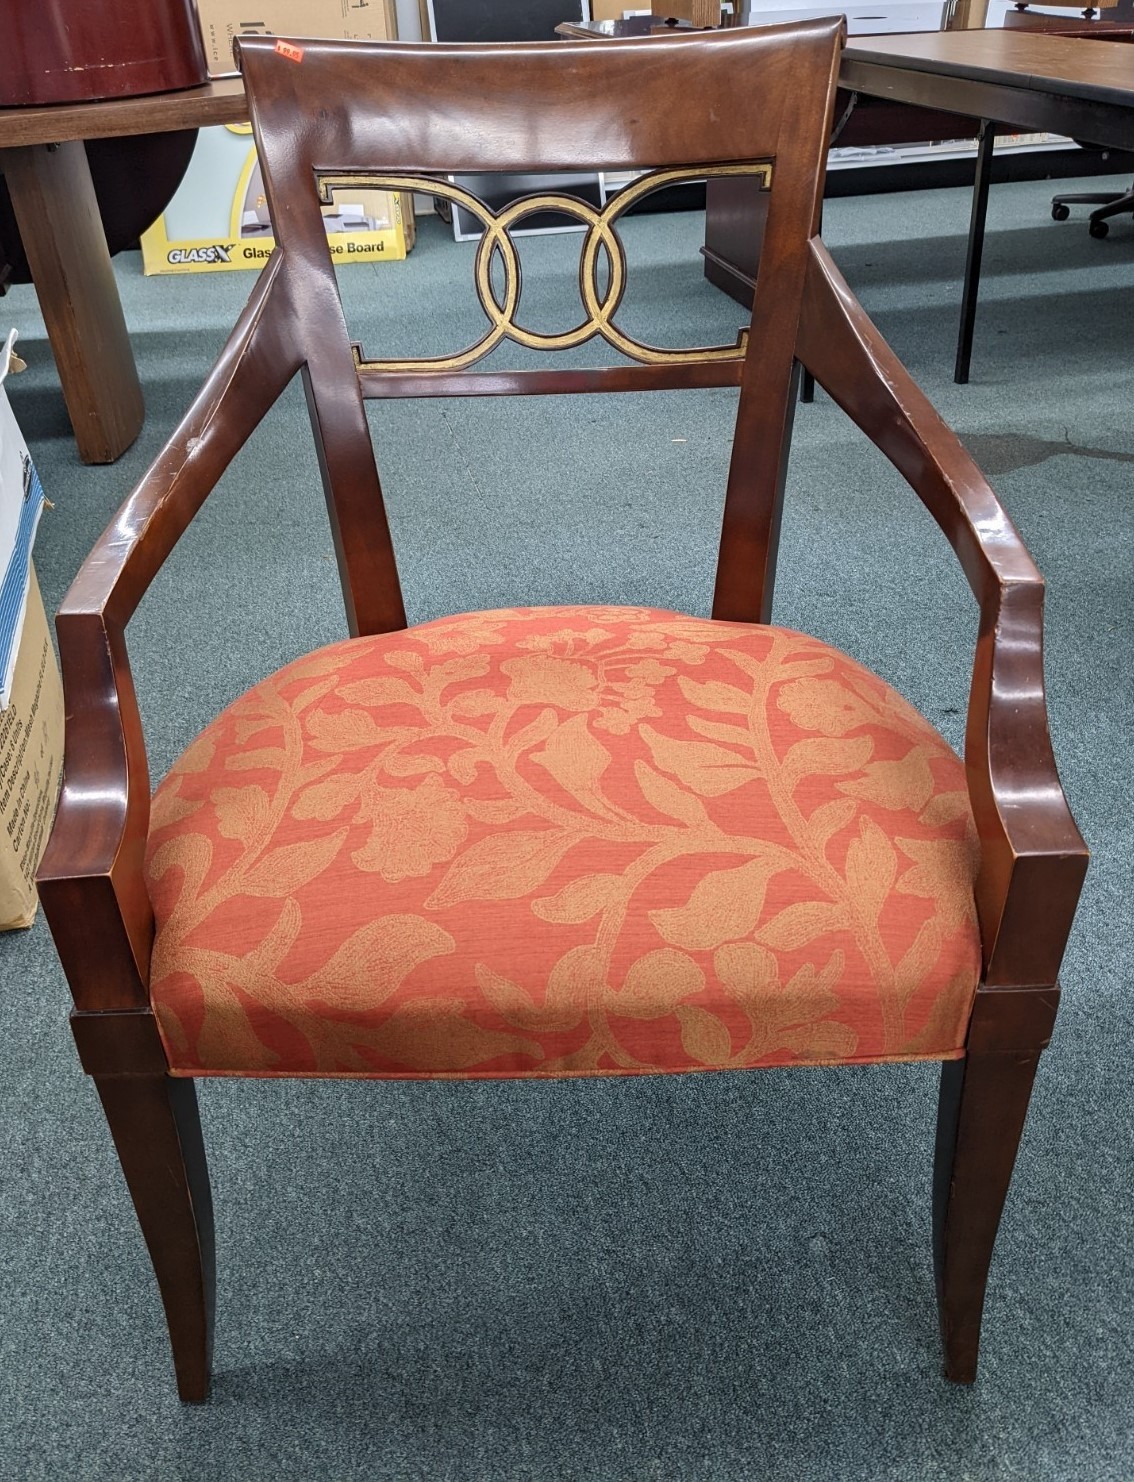 Used Cherry Frame Office Chair